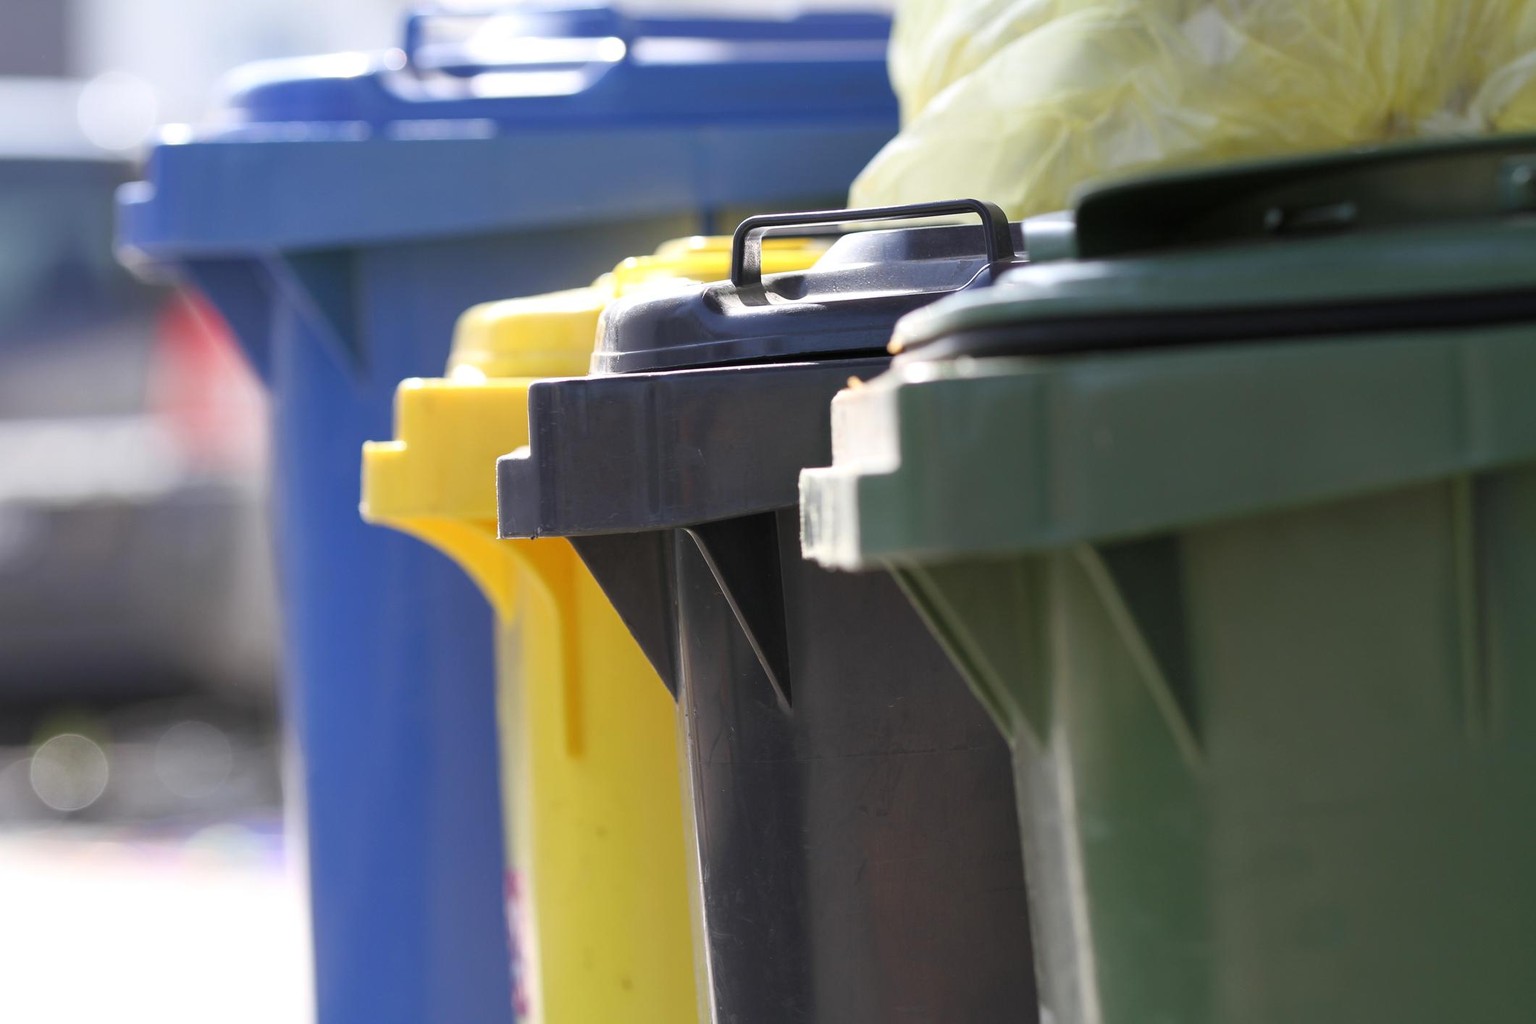 Garbage cans in different colors (blue, yellow, green, grey) in Germany.